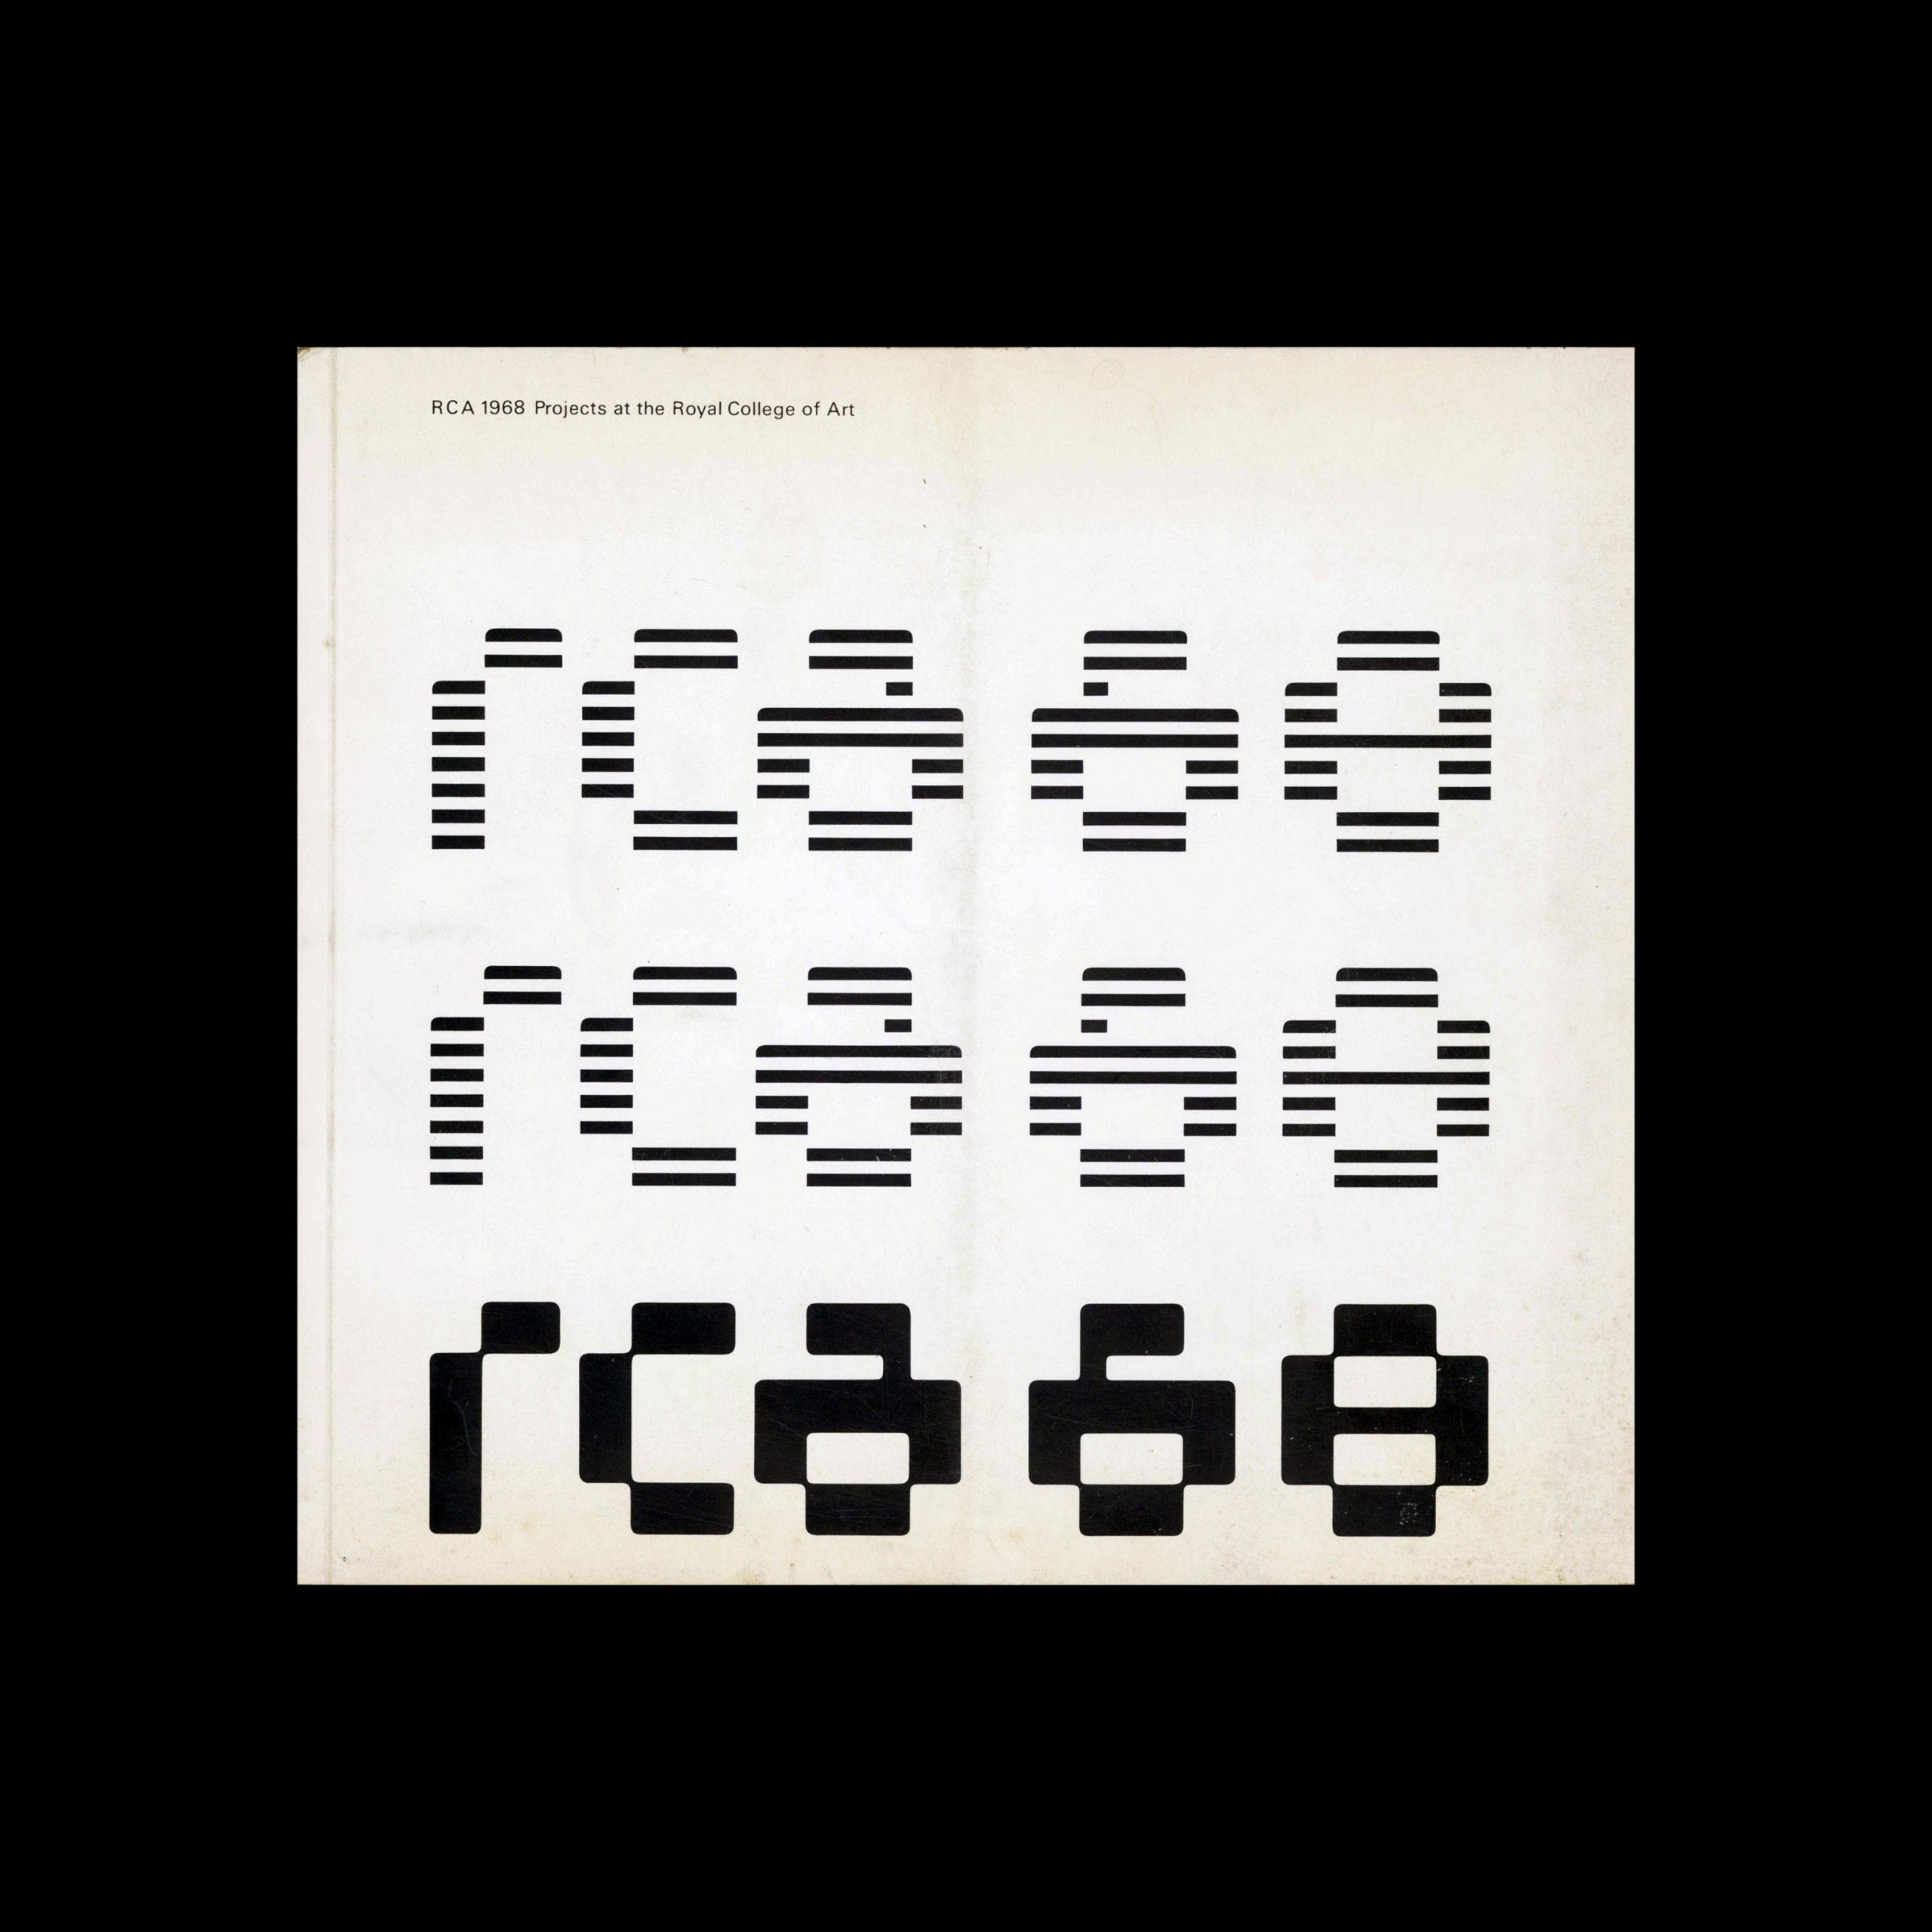 RCA 1968, Projects at the Royal College of Art, 1968